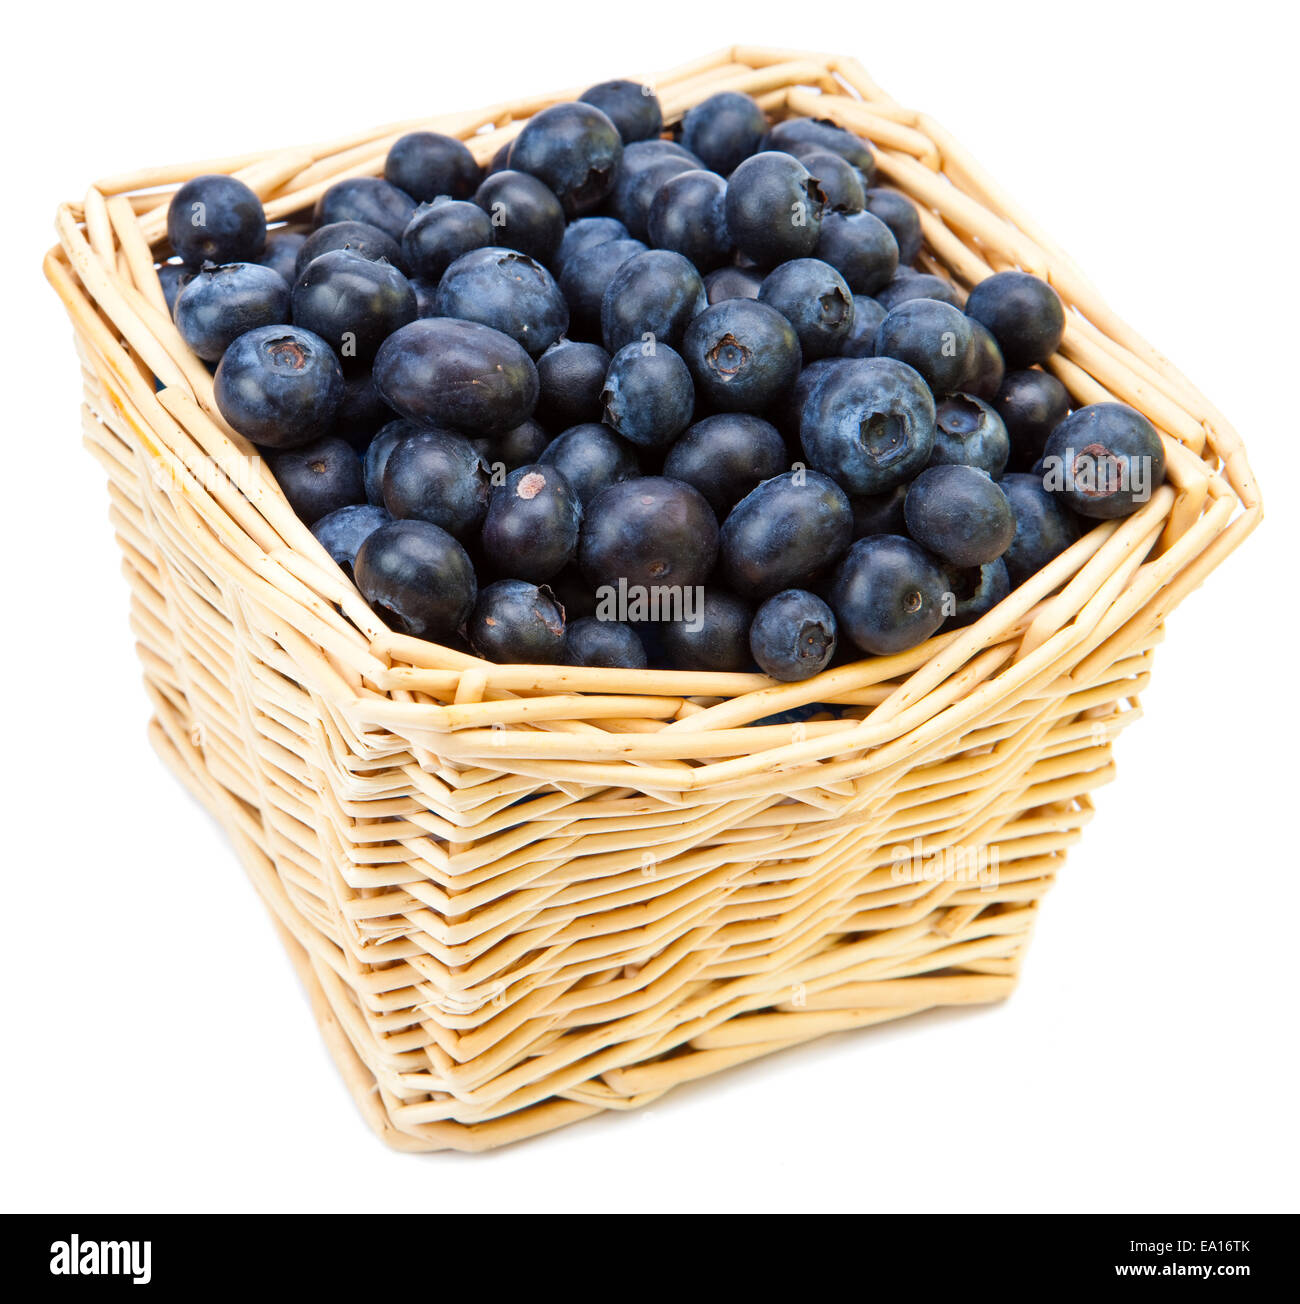 The basket full of a ripe blueberry Stock Photo